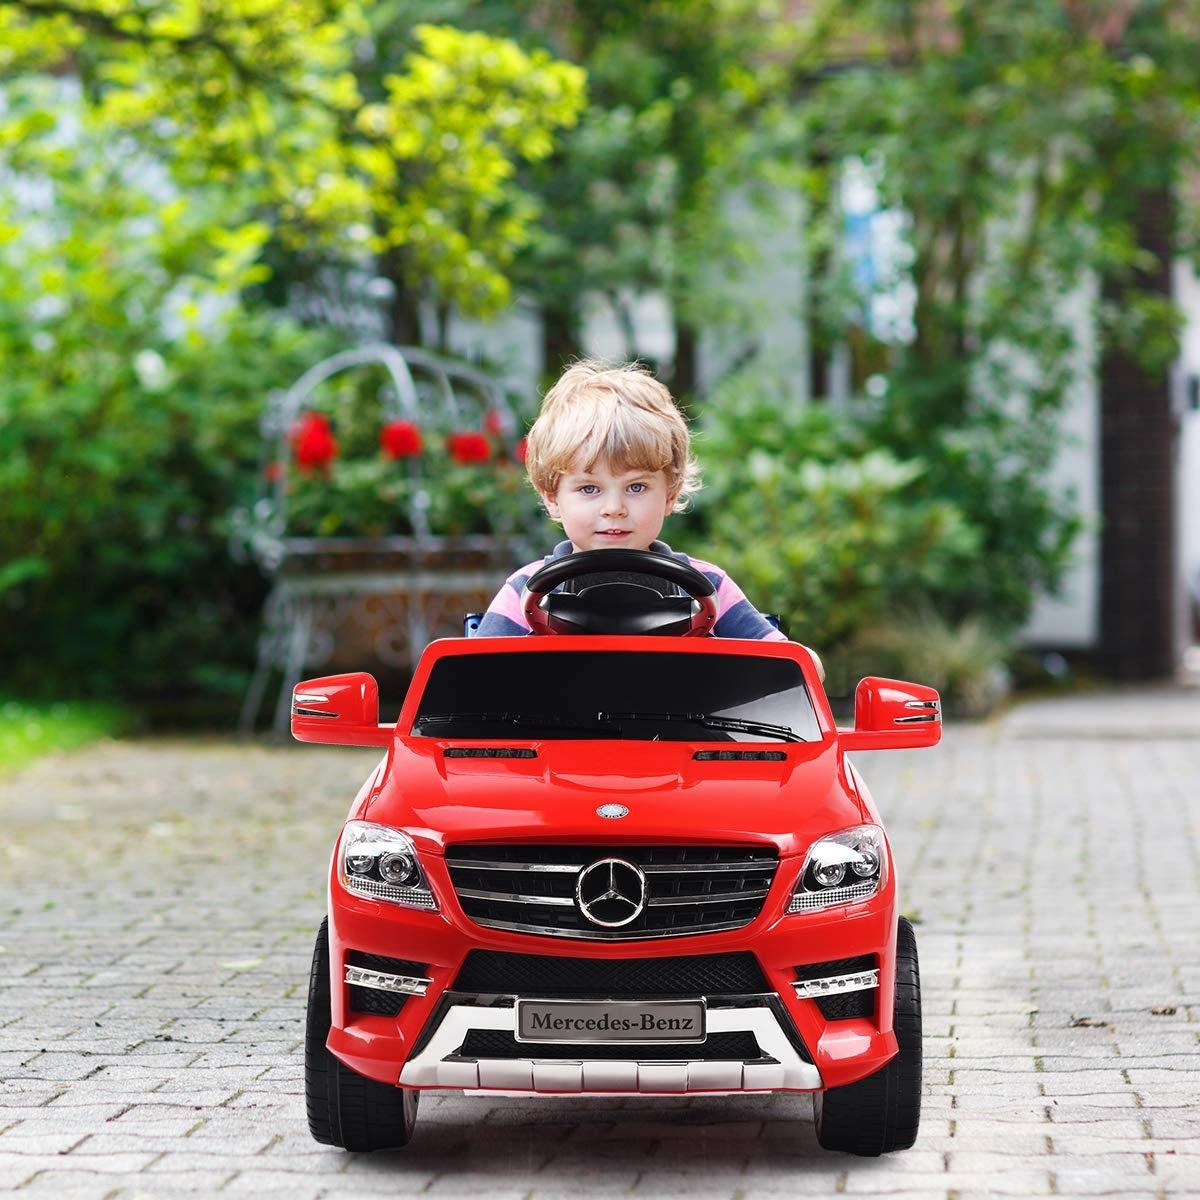 Safety First: The car features a comfortable seat with a safety belt, ensuring that children have a secure and comfortable driving experience. However, it is important to supervise your child while they play.